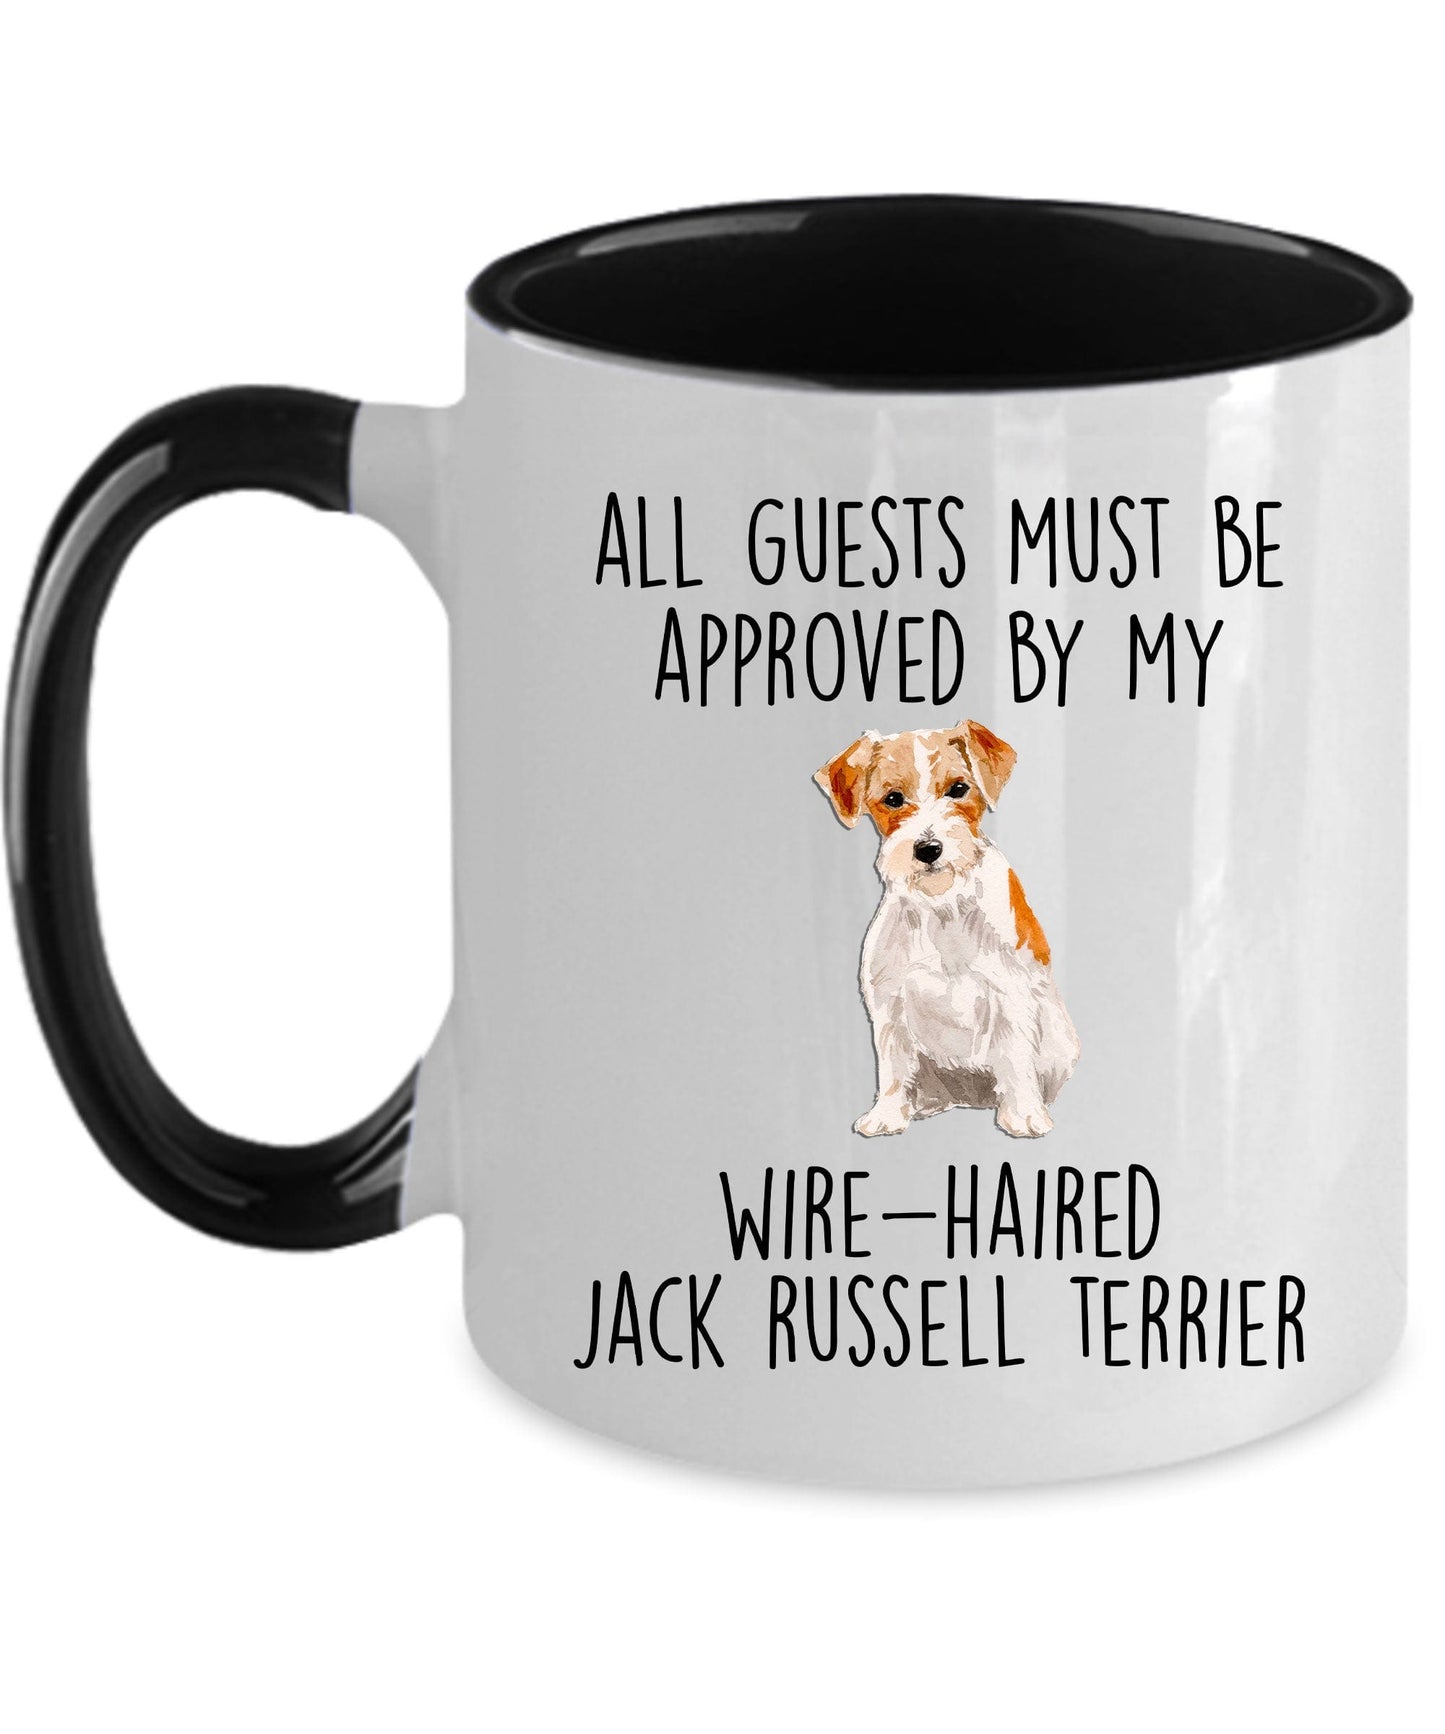 Funny Wire-haired Jack Russell Terrier Dog Custom Ceramic Coffee Mug - Guests must be approved